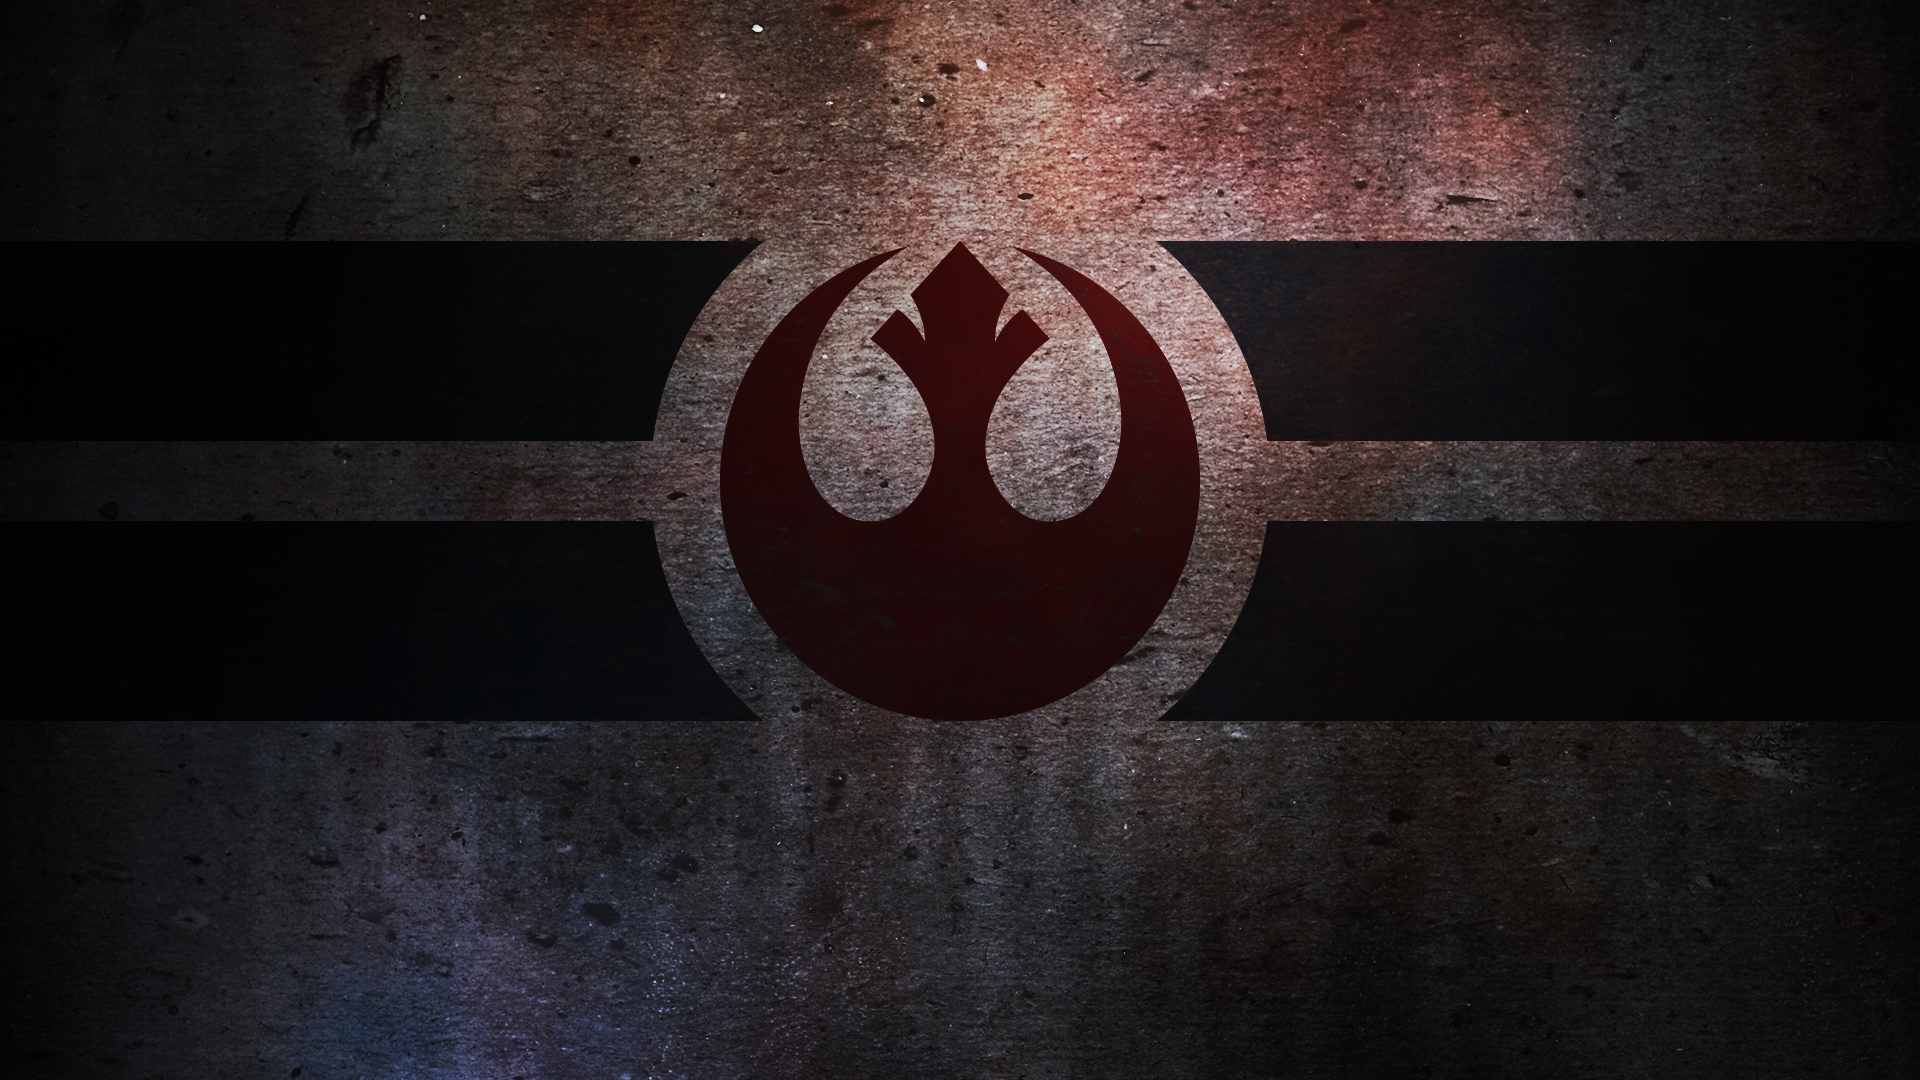 Download mobile wallpaper Star Wars, Movie for free.